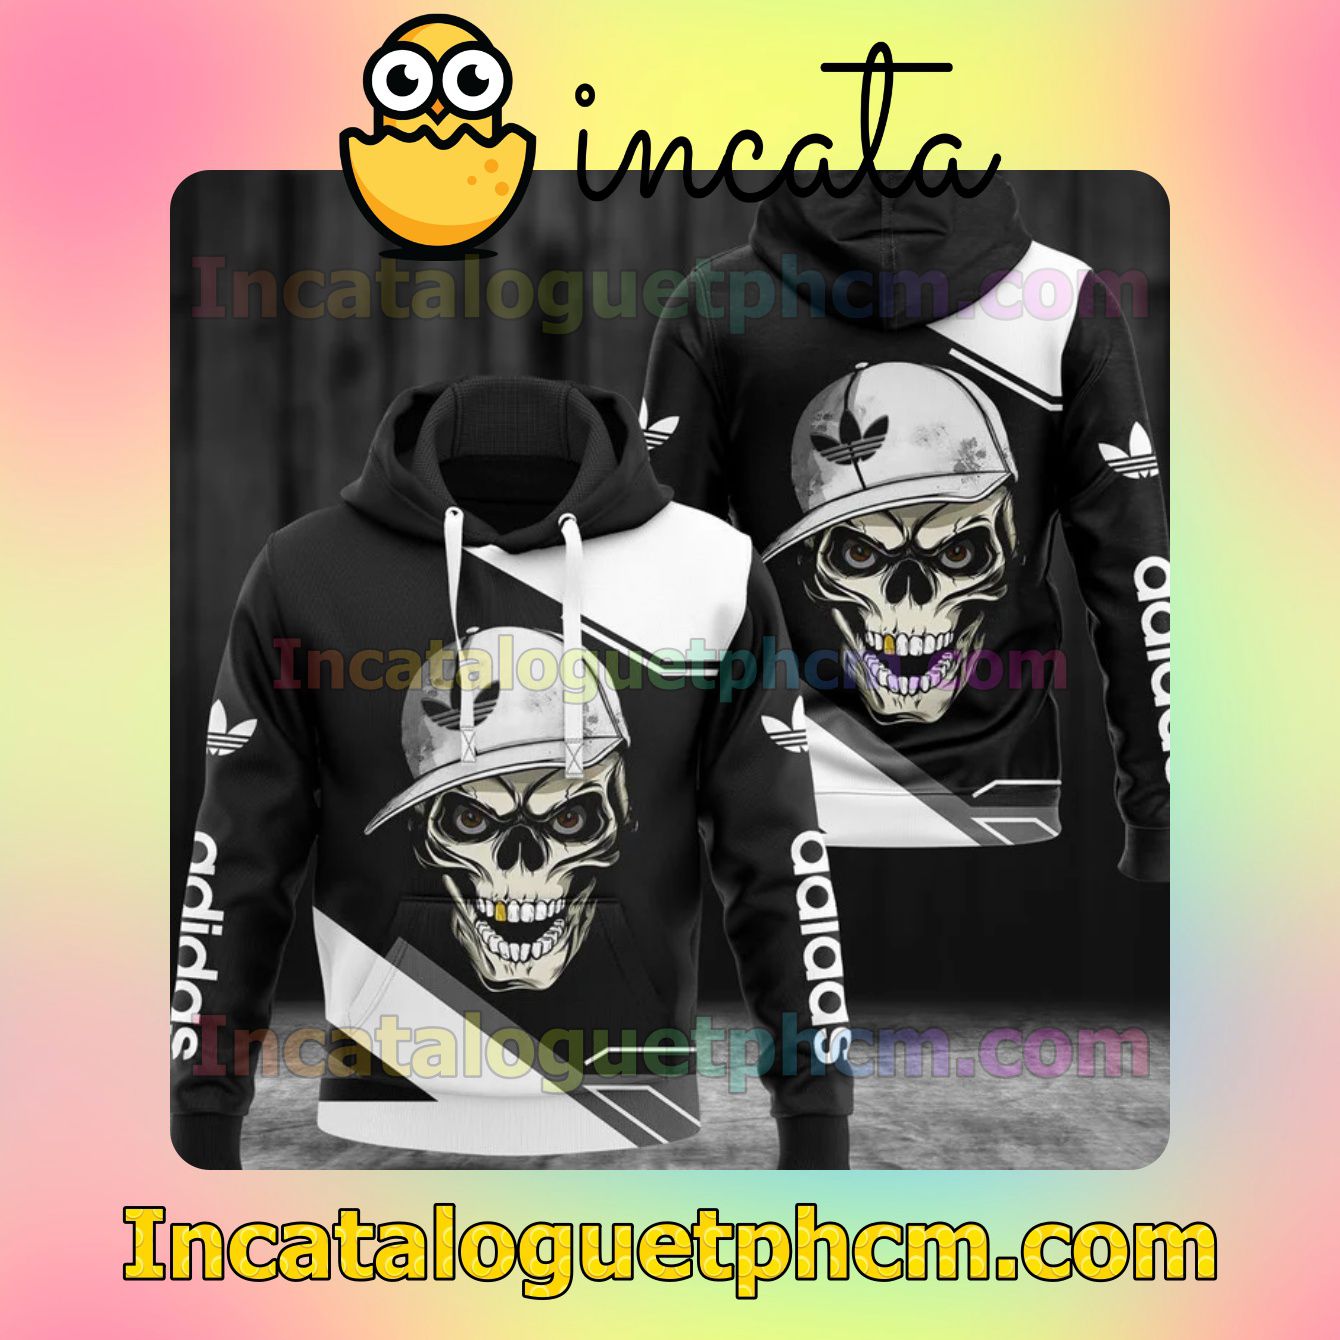 Limited Edition Adidas Skull Wearing Hat Black And White Zipper Hooded Sweatshirt And Pants